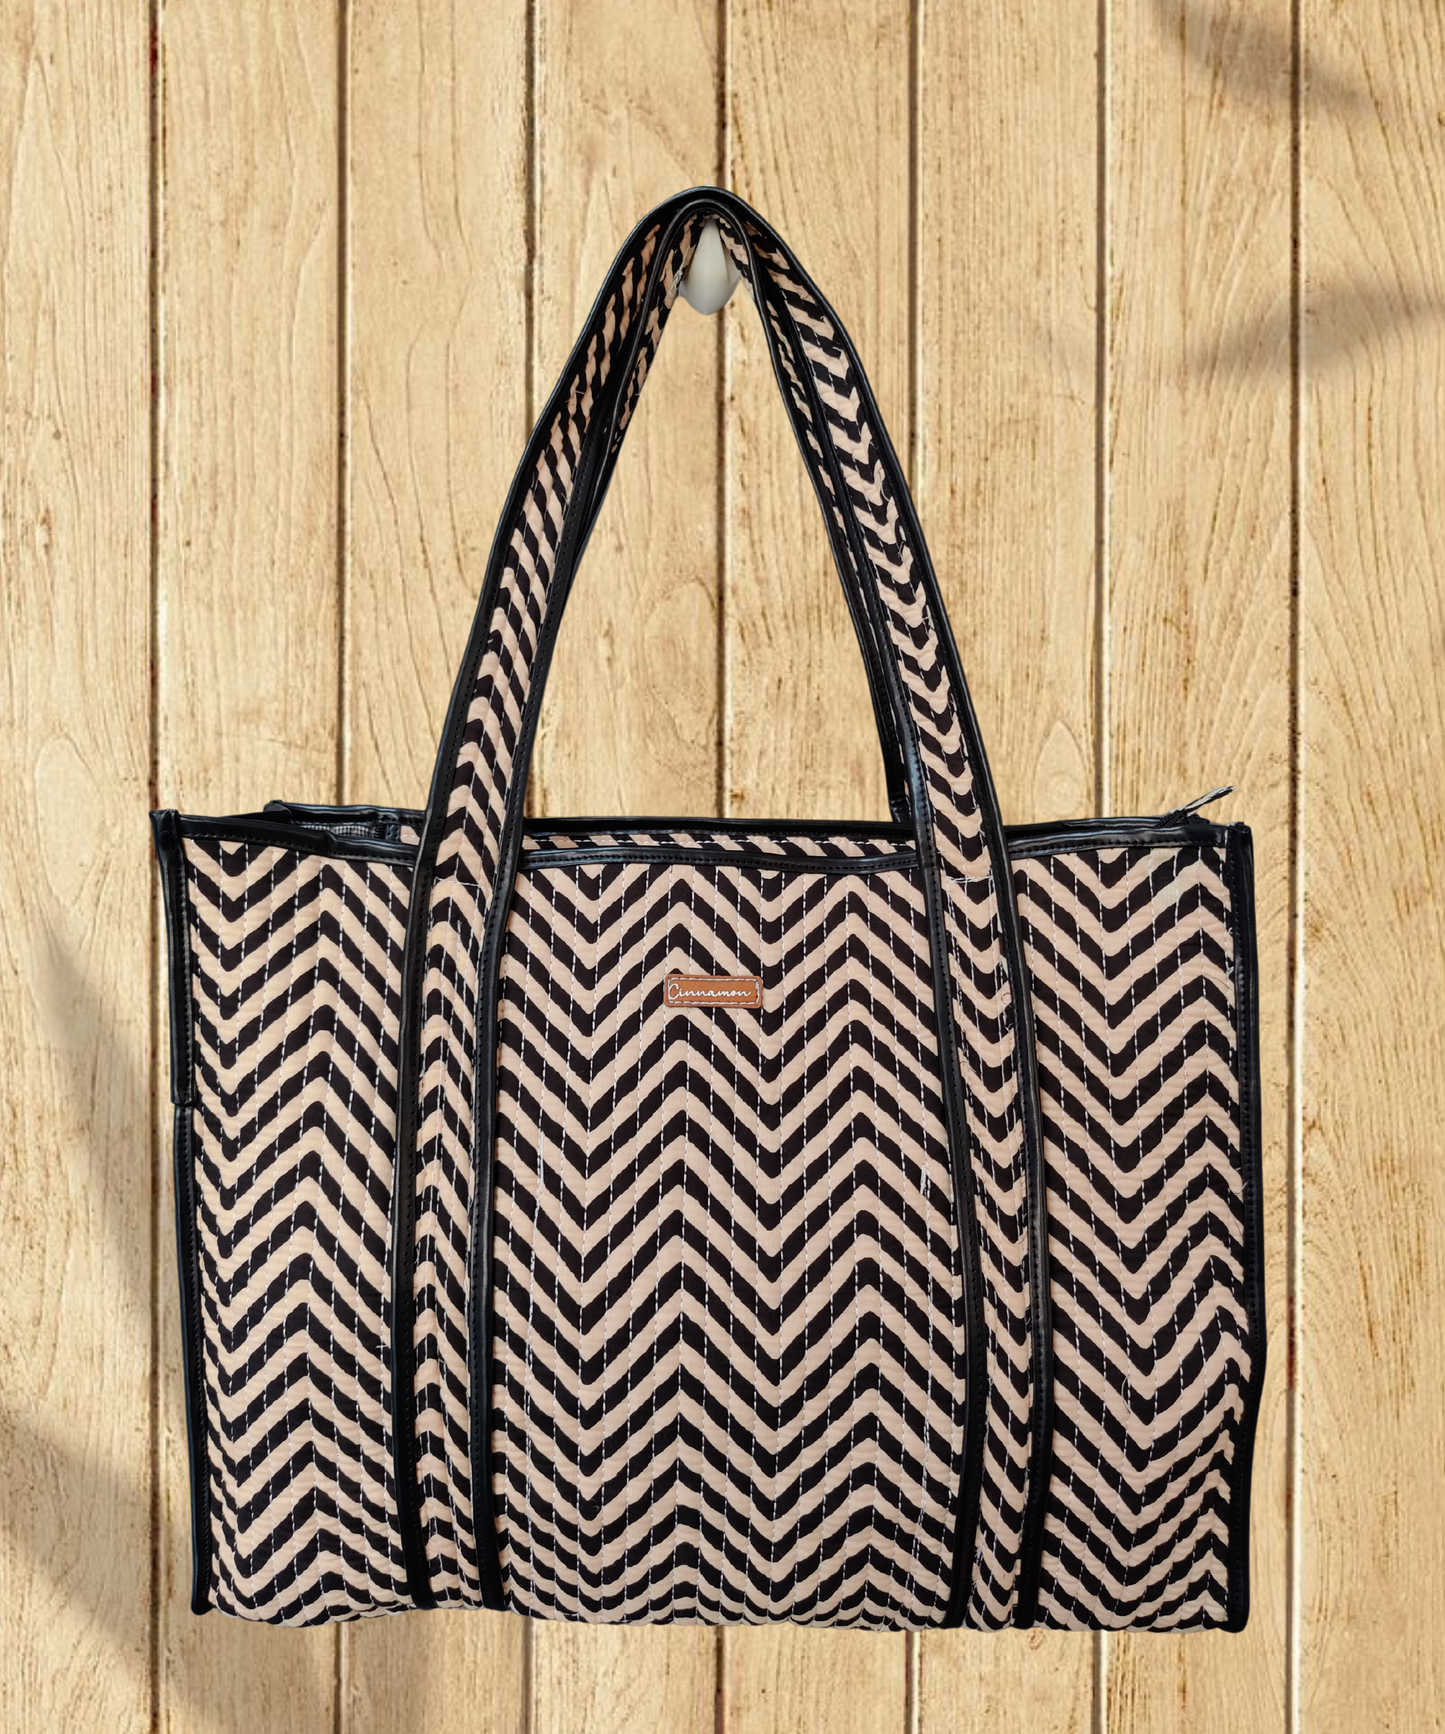 Zig Zag Stripes Cotton Quilted Tote Bag with zipper